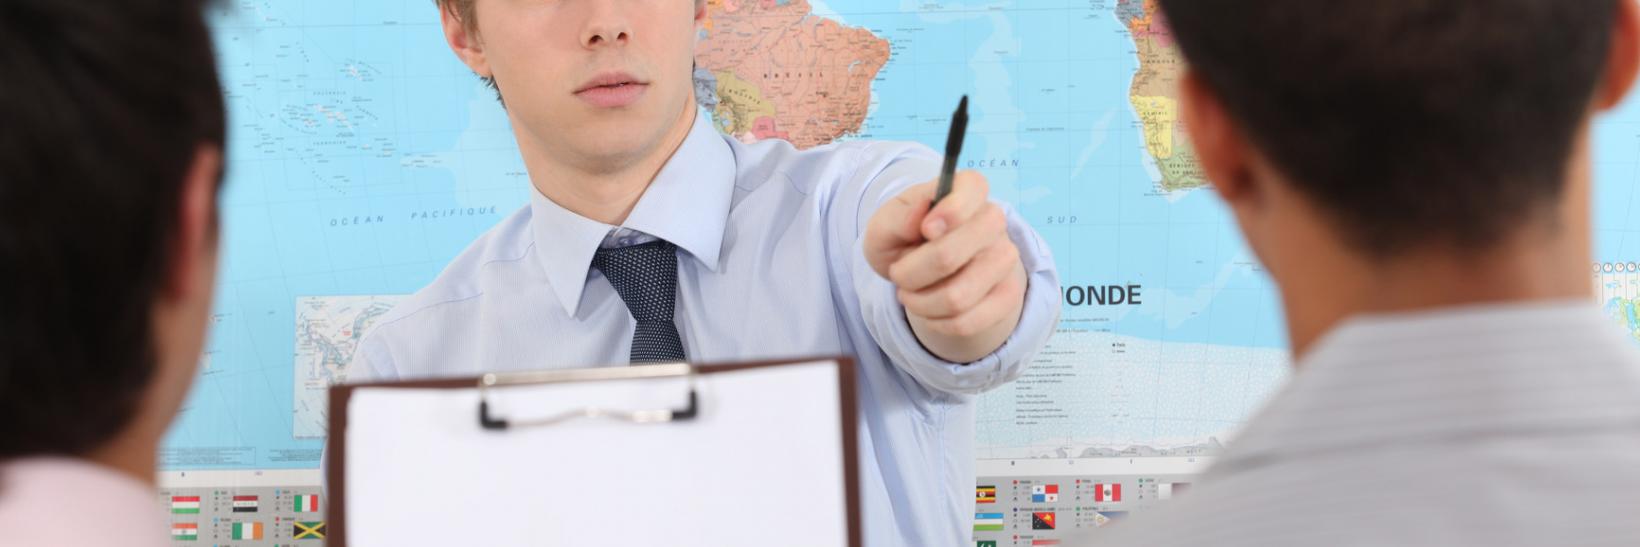 Man stands in front of map in classroom. 